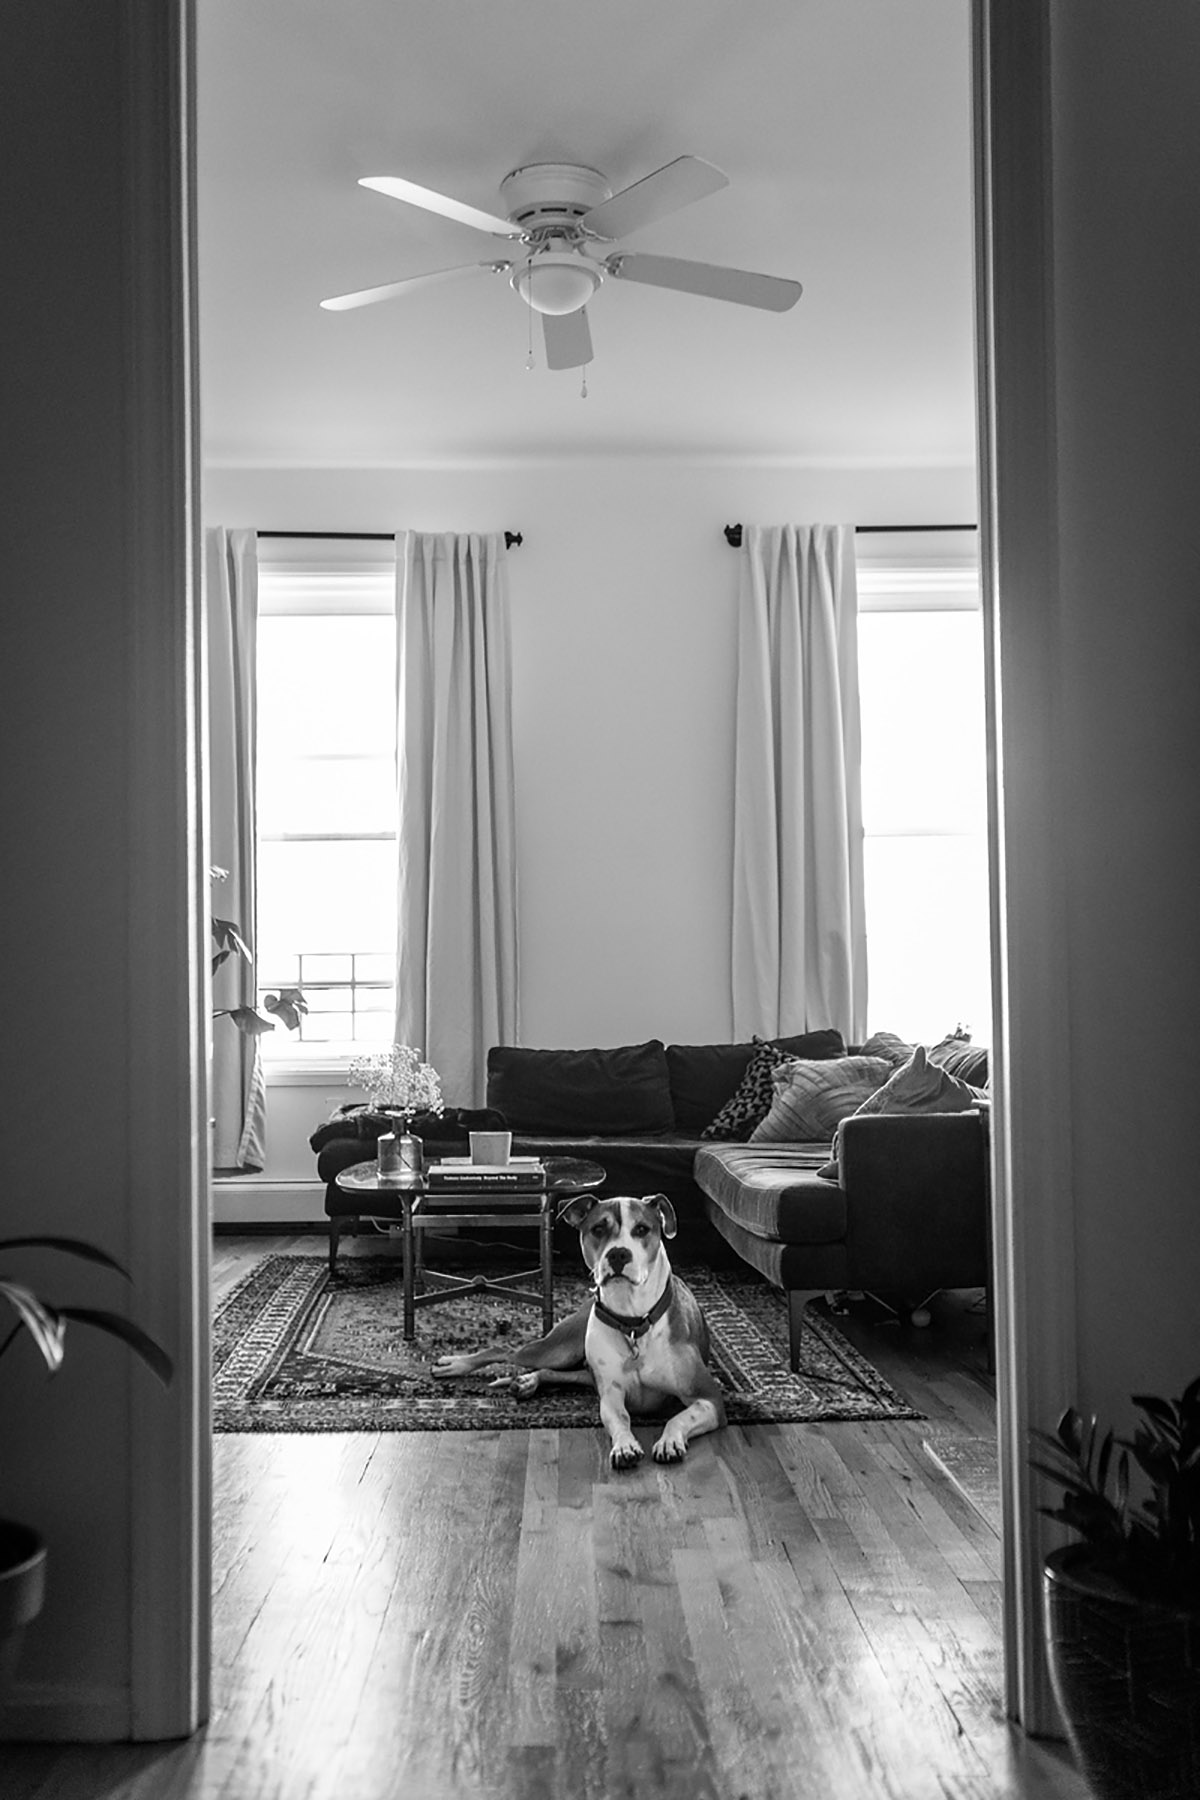 BW dog laying on the floor in the living room looking to the camera